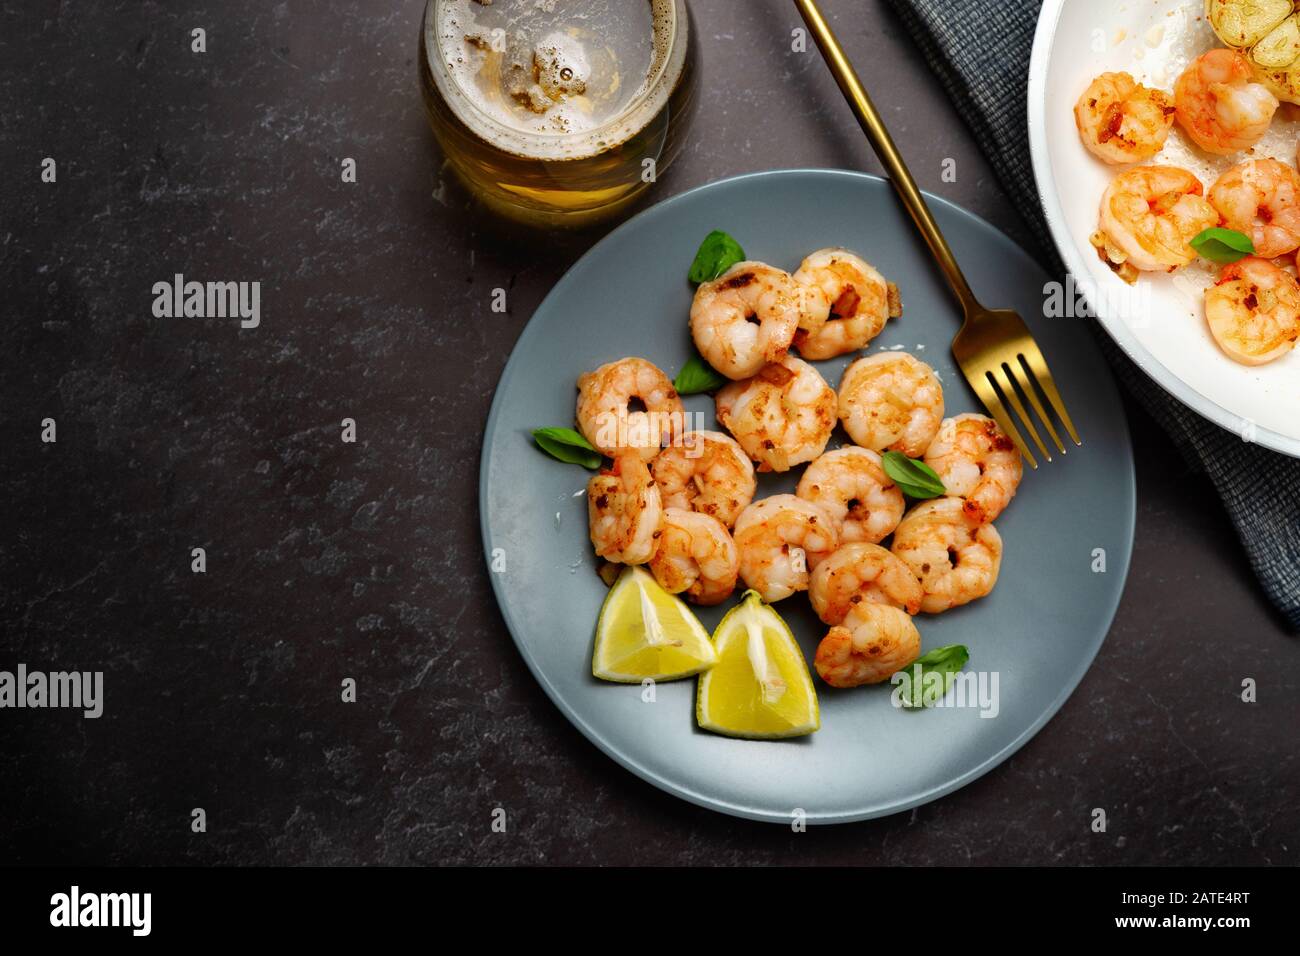 Top view of fried king prawns in a plate with glass of beer on black background Stock Photo